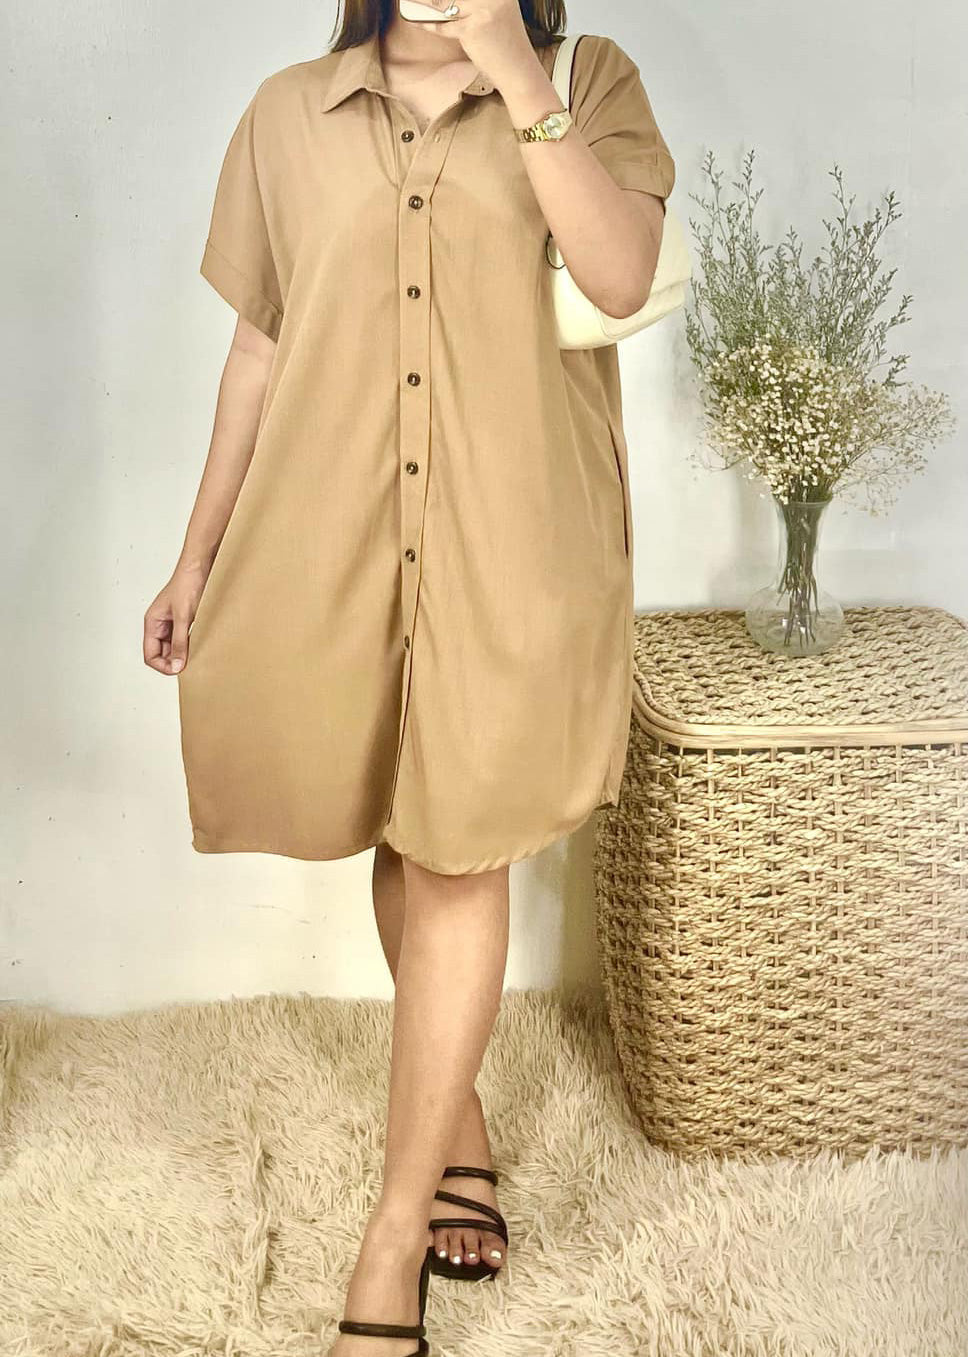 Gaela Polo Button Down Dress Fits Up to2XL